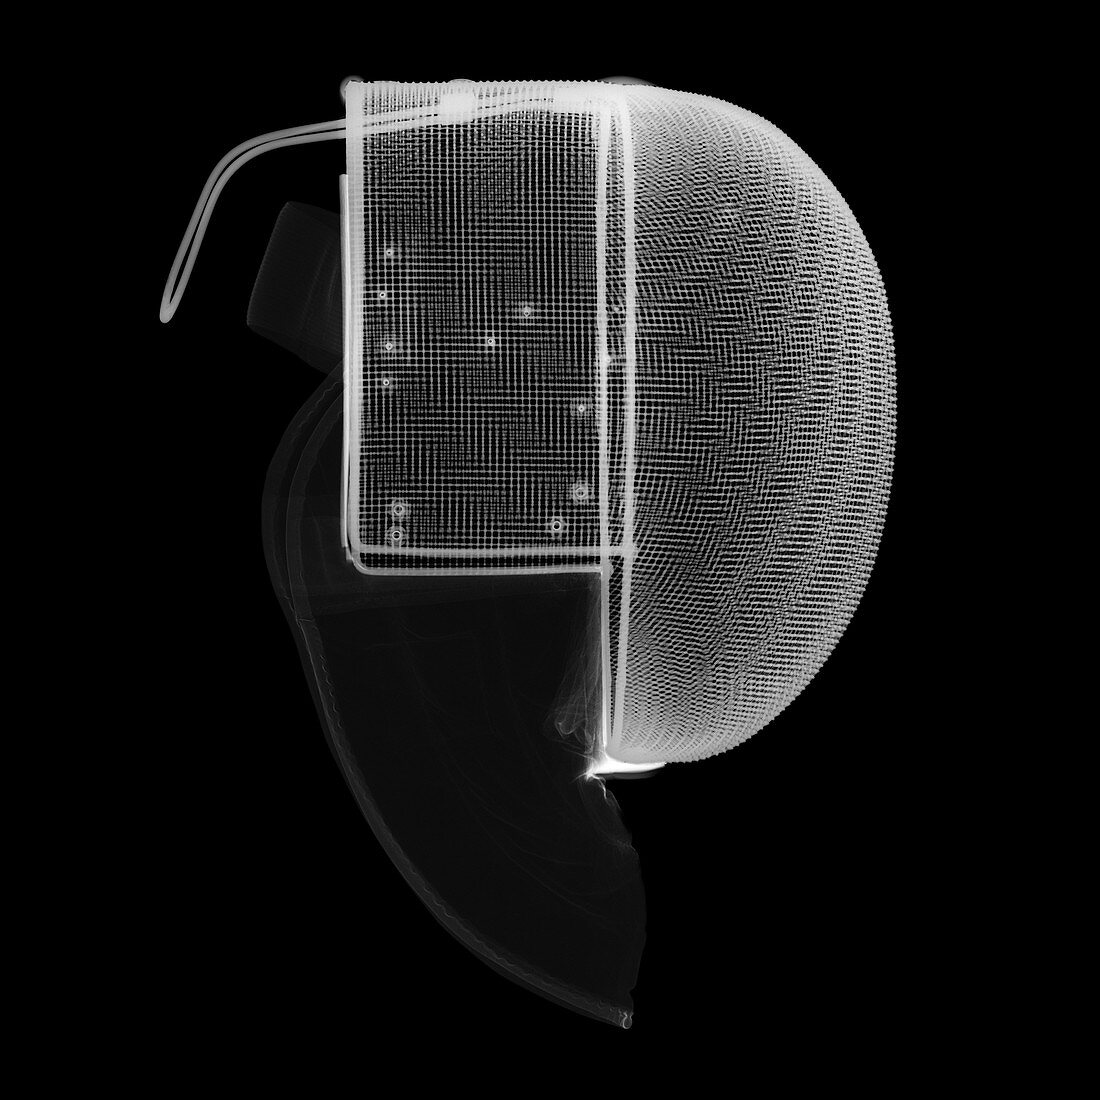 Fencing mask, X-ray